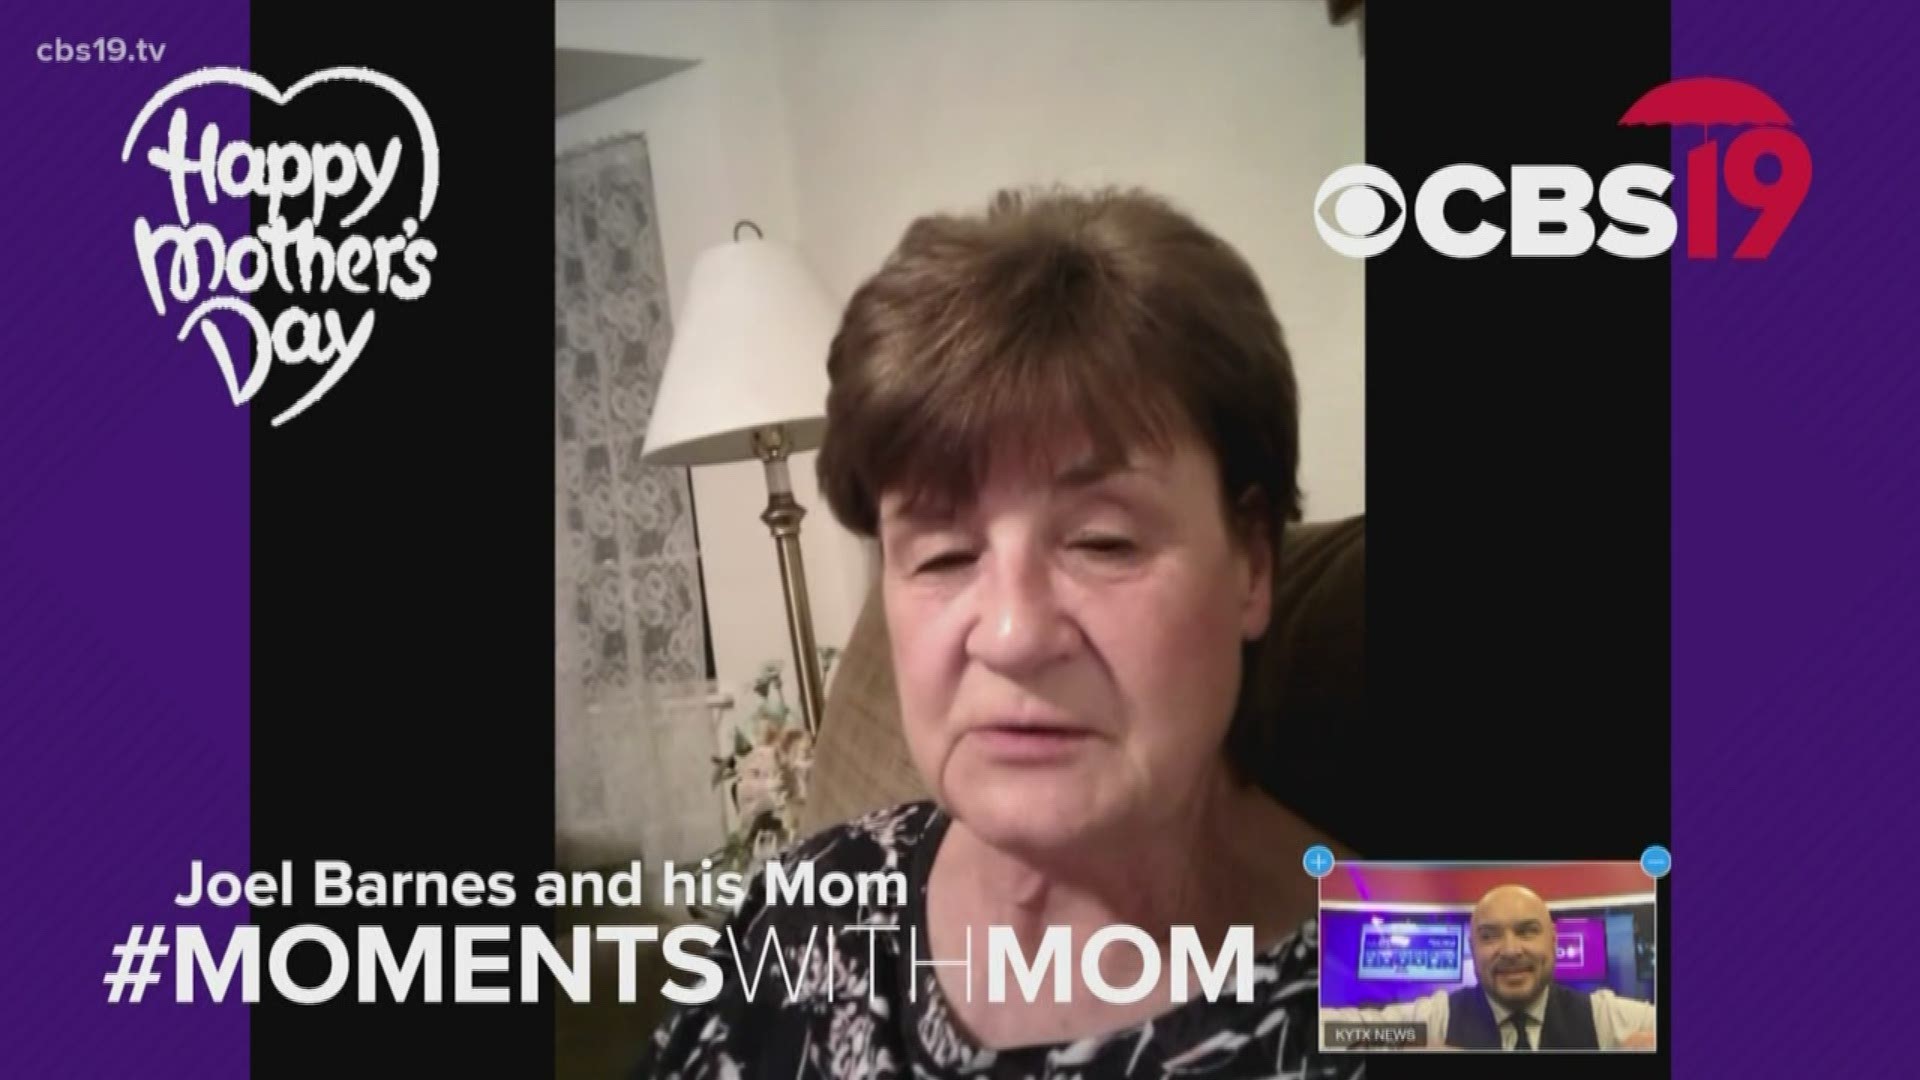 Joel Barnes asks his mom the tough questions before Mother's Day!